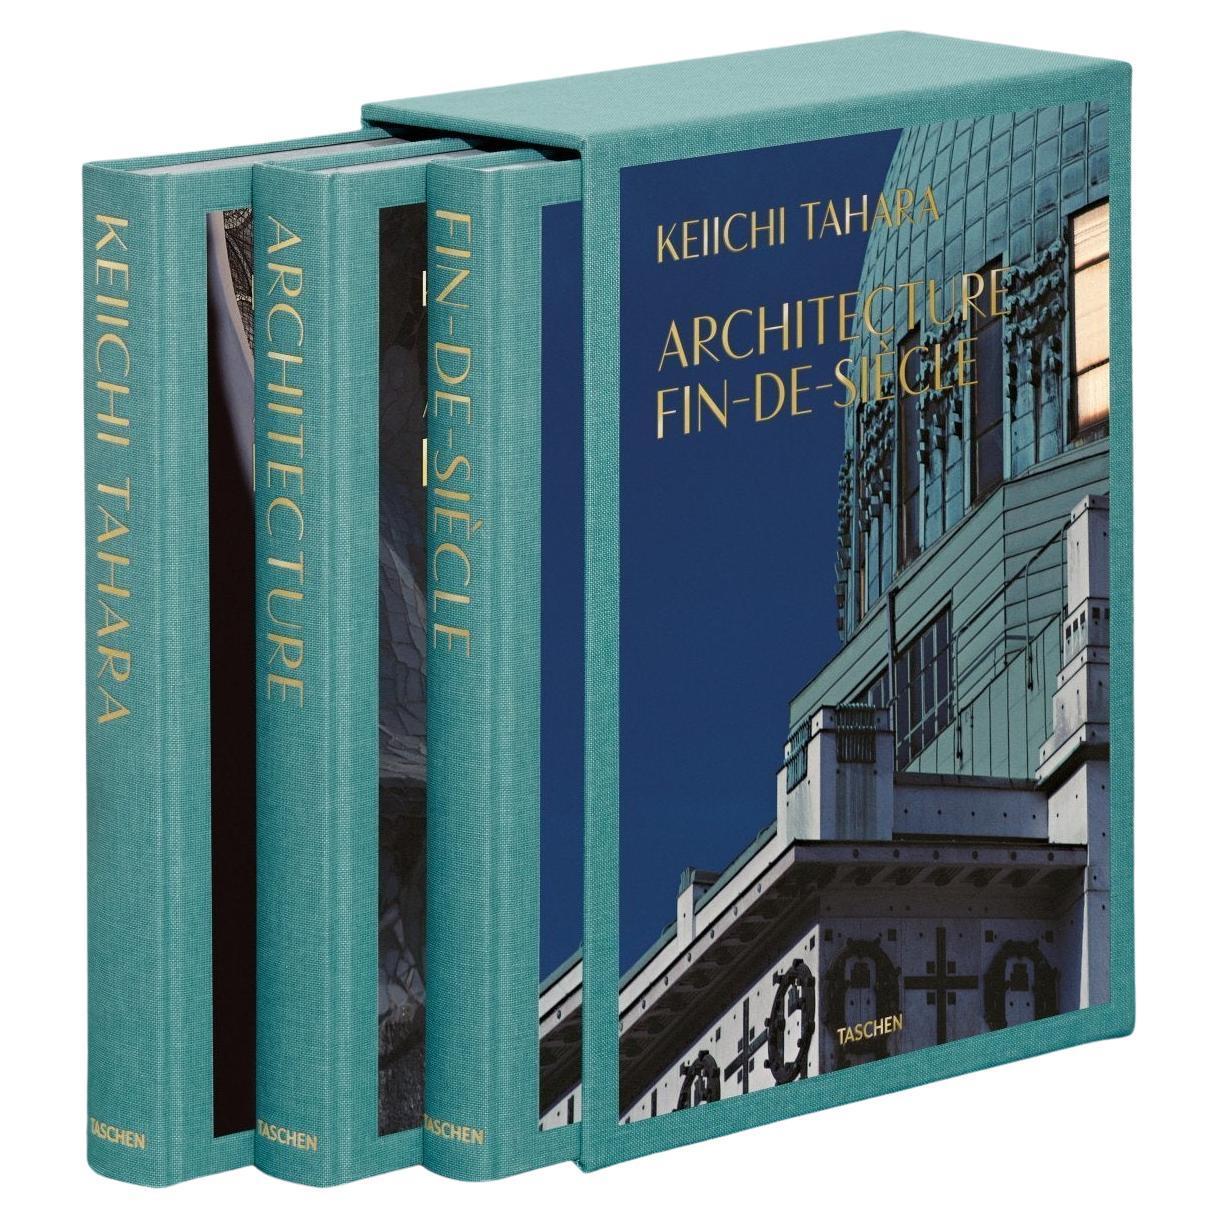 Keiichi Tahara, Architecture Fin-de-Siècle, Limited Edition, Set of 3 Books For Sale